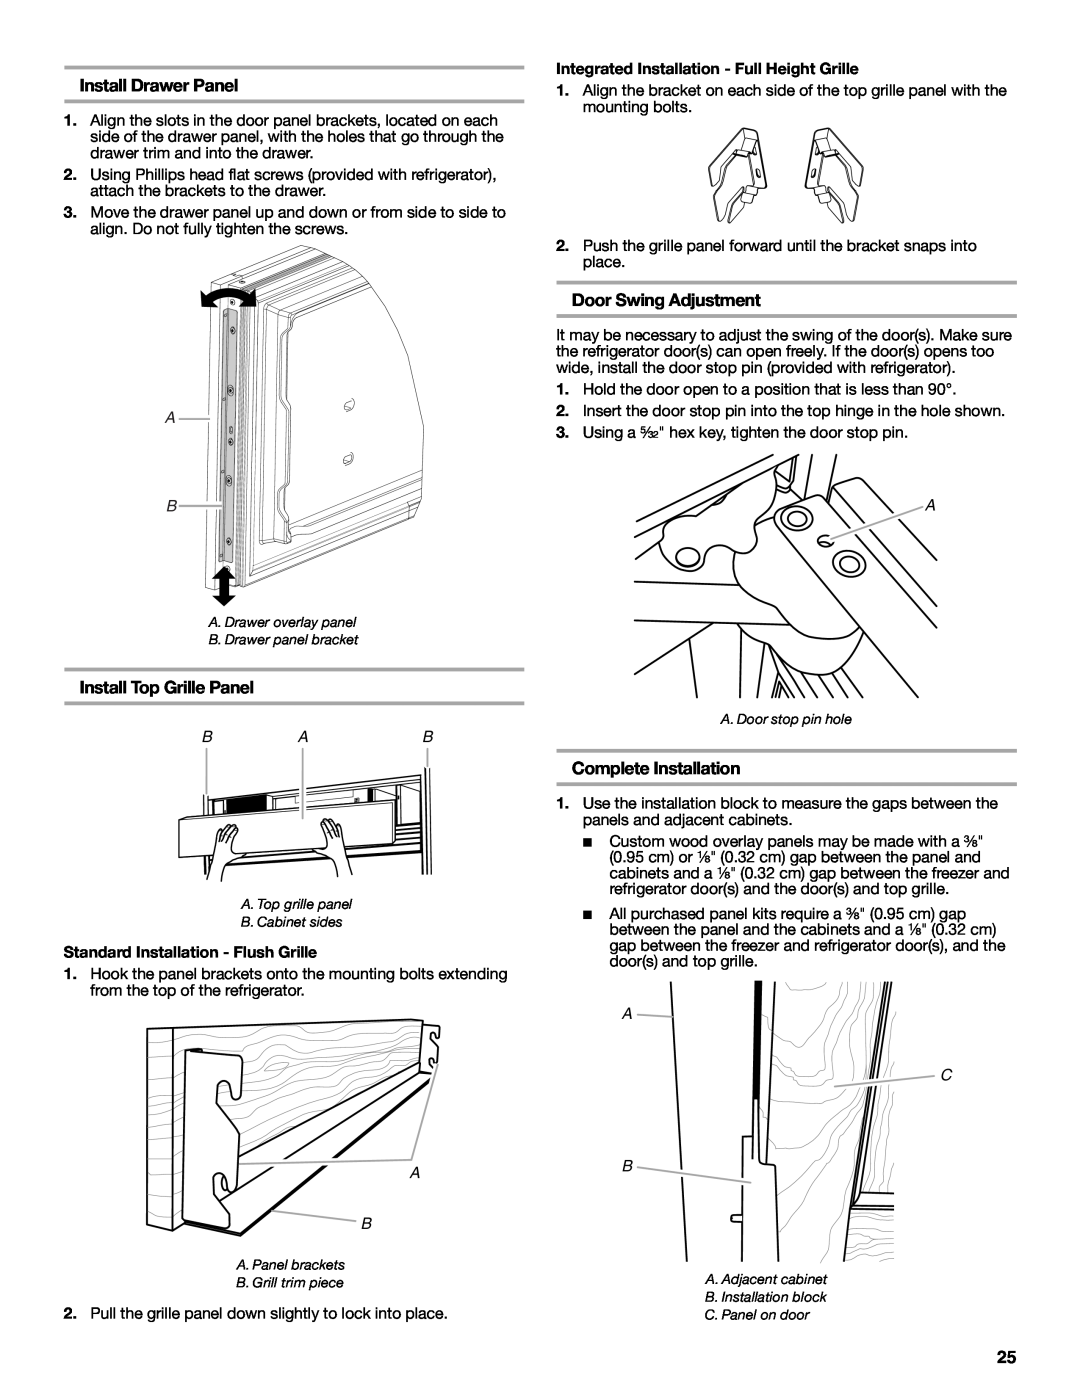 Jenn-Air W10379137A Install Drawer Panel, Install Top Grille Panel, Door Swing Adjustment, Complete Installation, A C B 